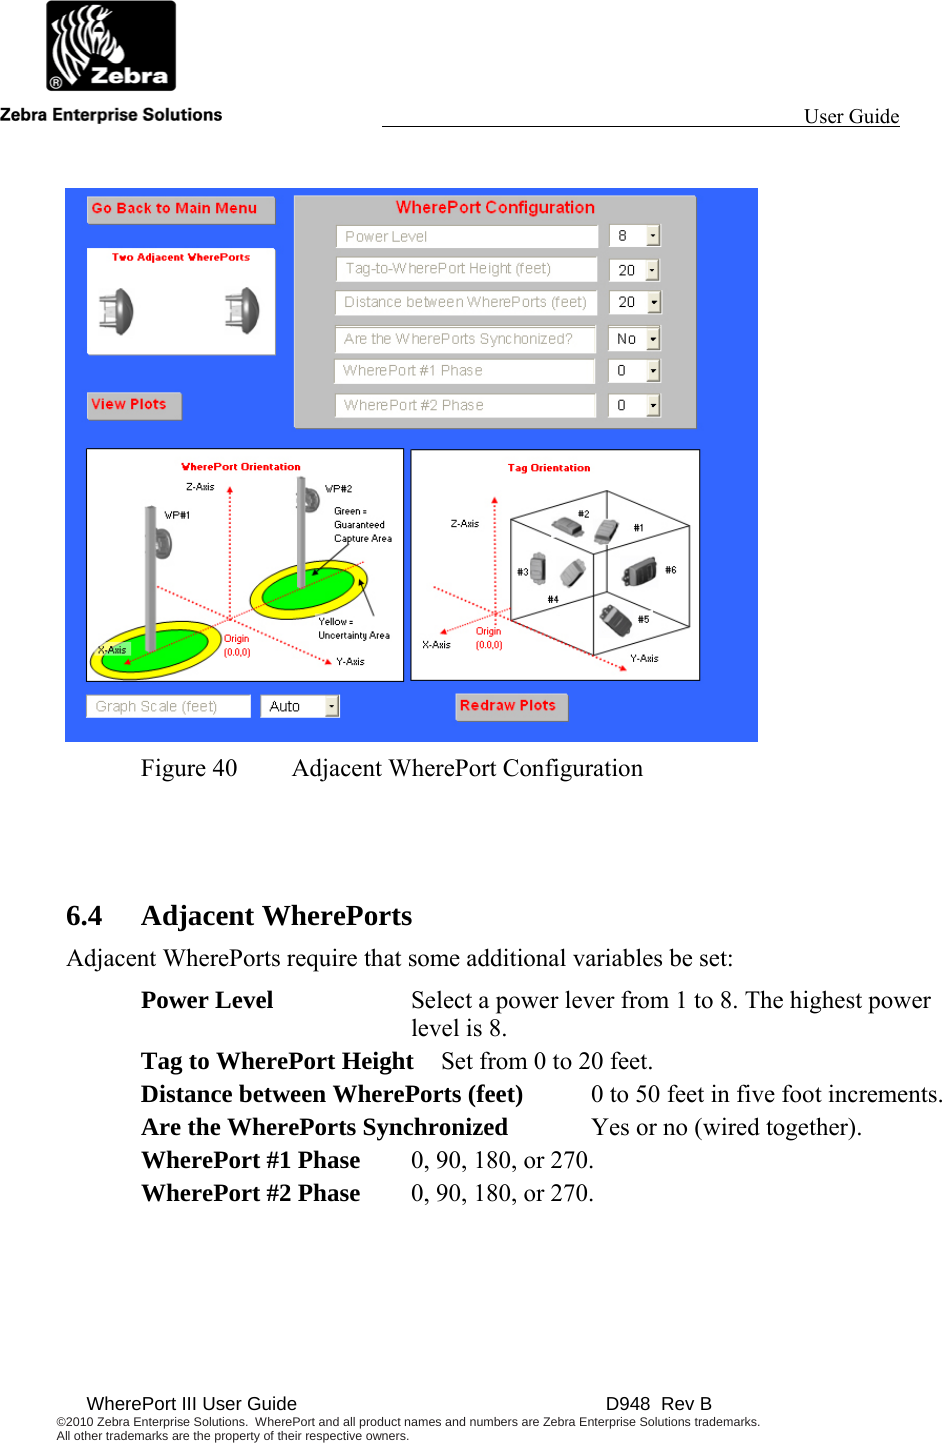                                                                                                                 User Guide                                        WherePort III User Guide    D948  Rev B ©2010 Zebra Enterprise Solutions.  WherePort and all product names and numbers are Zebra Enterprise Solutions trademarks.  All other trademarks are the property of their respective owners.     Figure 40  Adjacent WherePort Configuration   6.4 Adjacent WherePorts Adjacent WherePorts require that some additional variables be set: Power Level  Select a power lever from 1 to 8. The highest power level is 8. Tag to WherePort Height  Set from 0 to 20 feet. Distance between WherePorts (feet)  0 to 50 feet in five foot increments. Are the WherePorts Synchronized   Yes or no (wired together). WherePort #1 Phase  0, 90, 180, or 270. WherePort #2 Phase  0, 90, 180, or 270. 